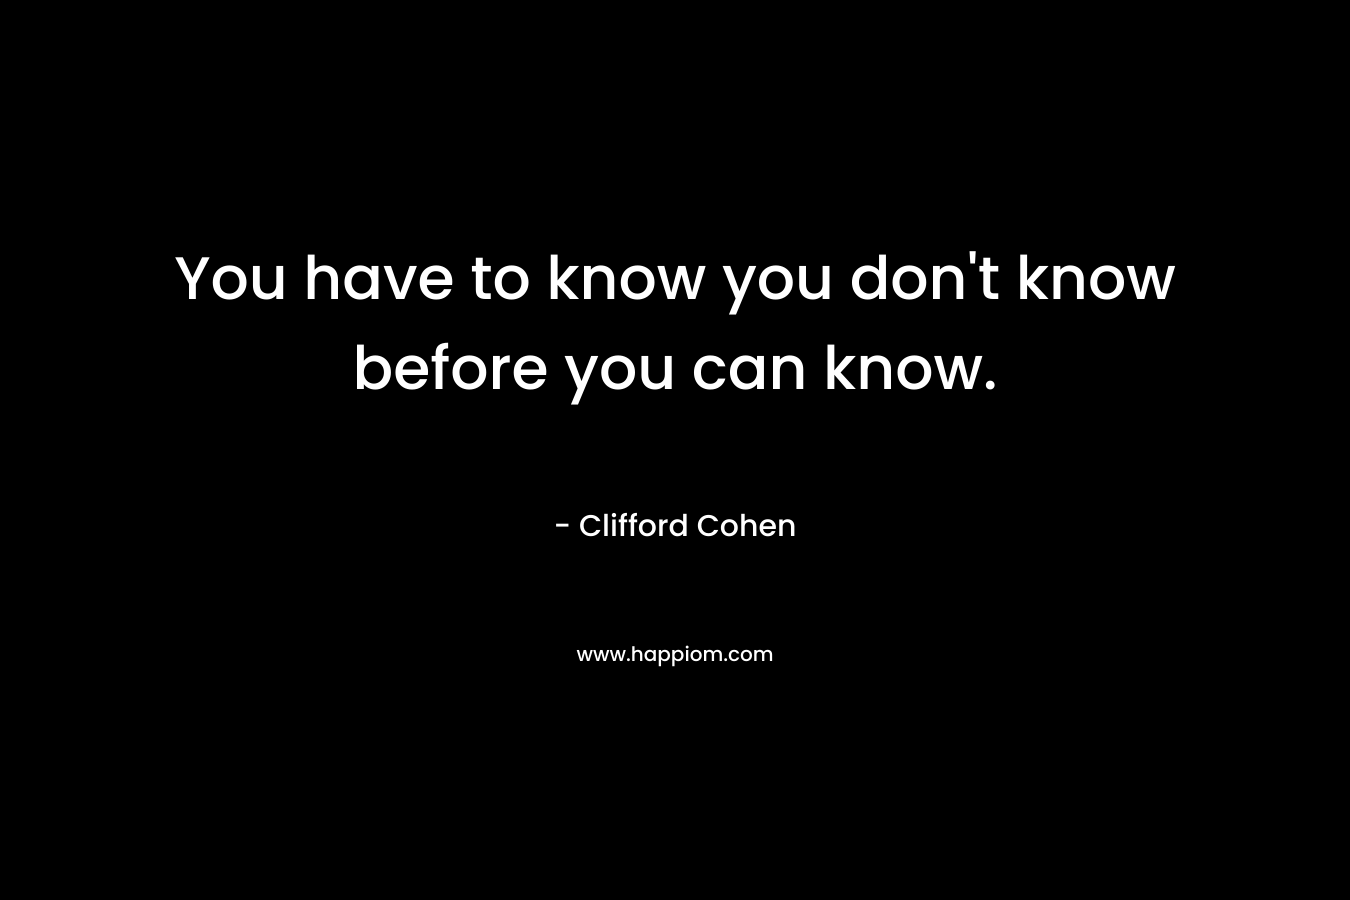 You have to know you don't know before you can know.